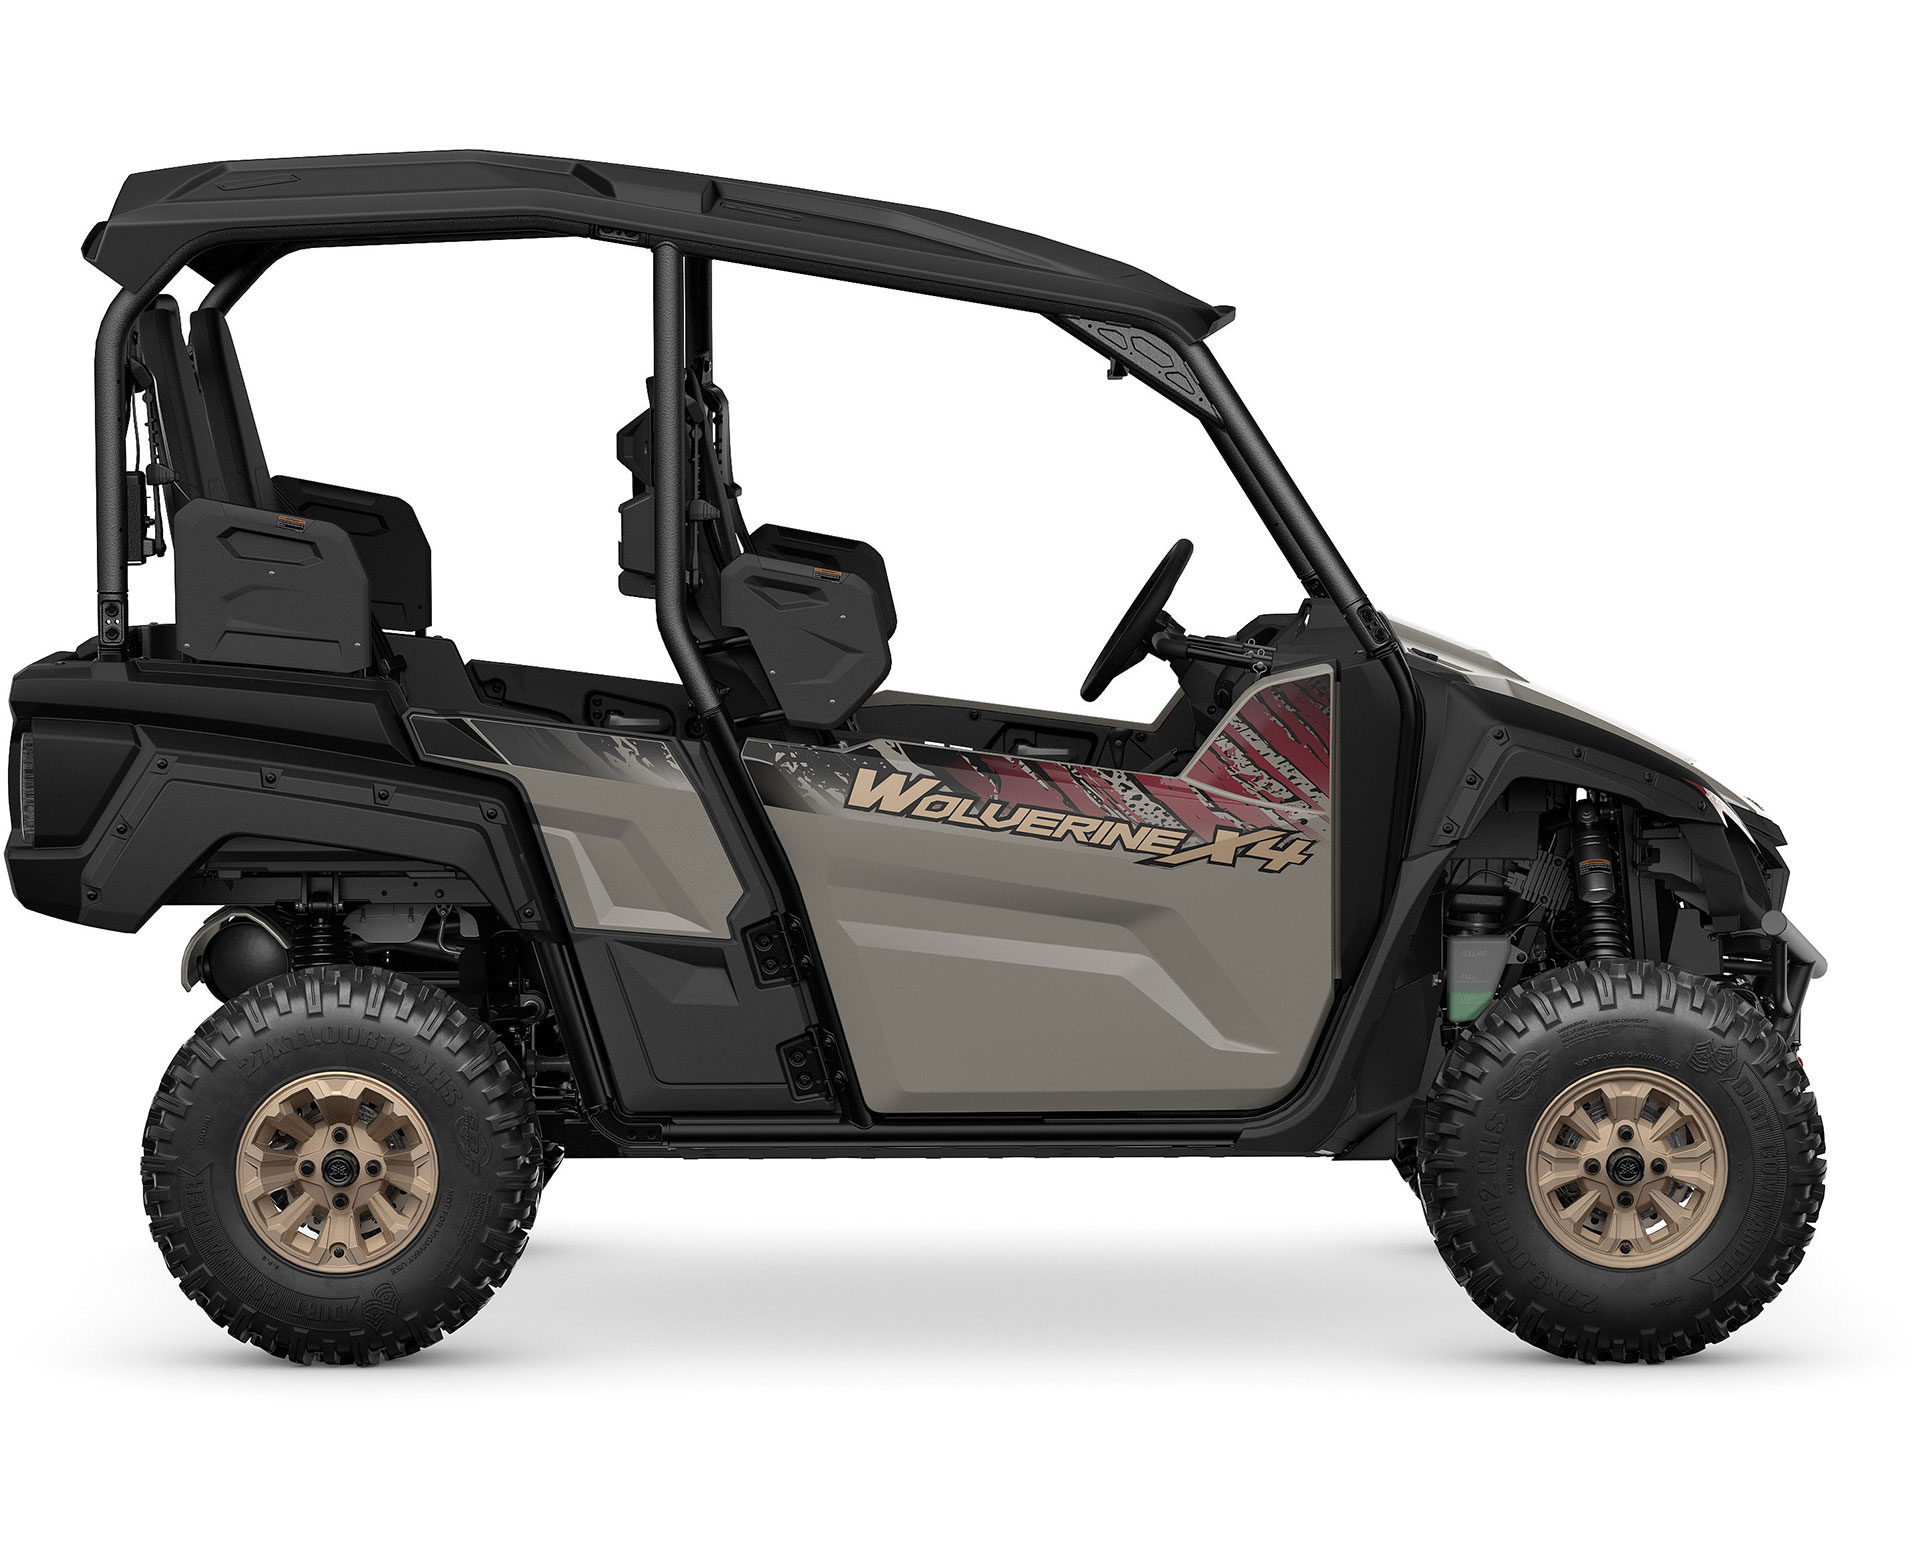 Thumbnail of your customized 2024 WOLVERINE® X4 850 SE